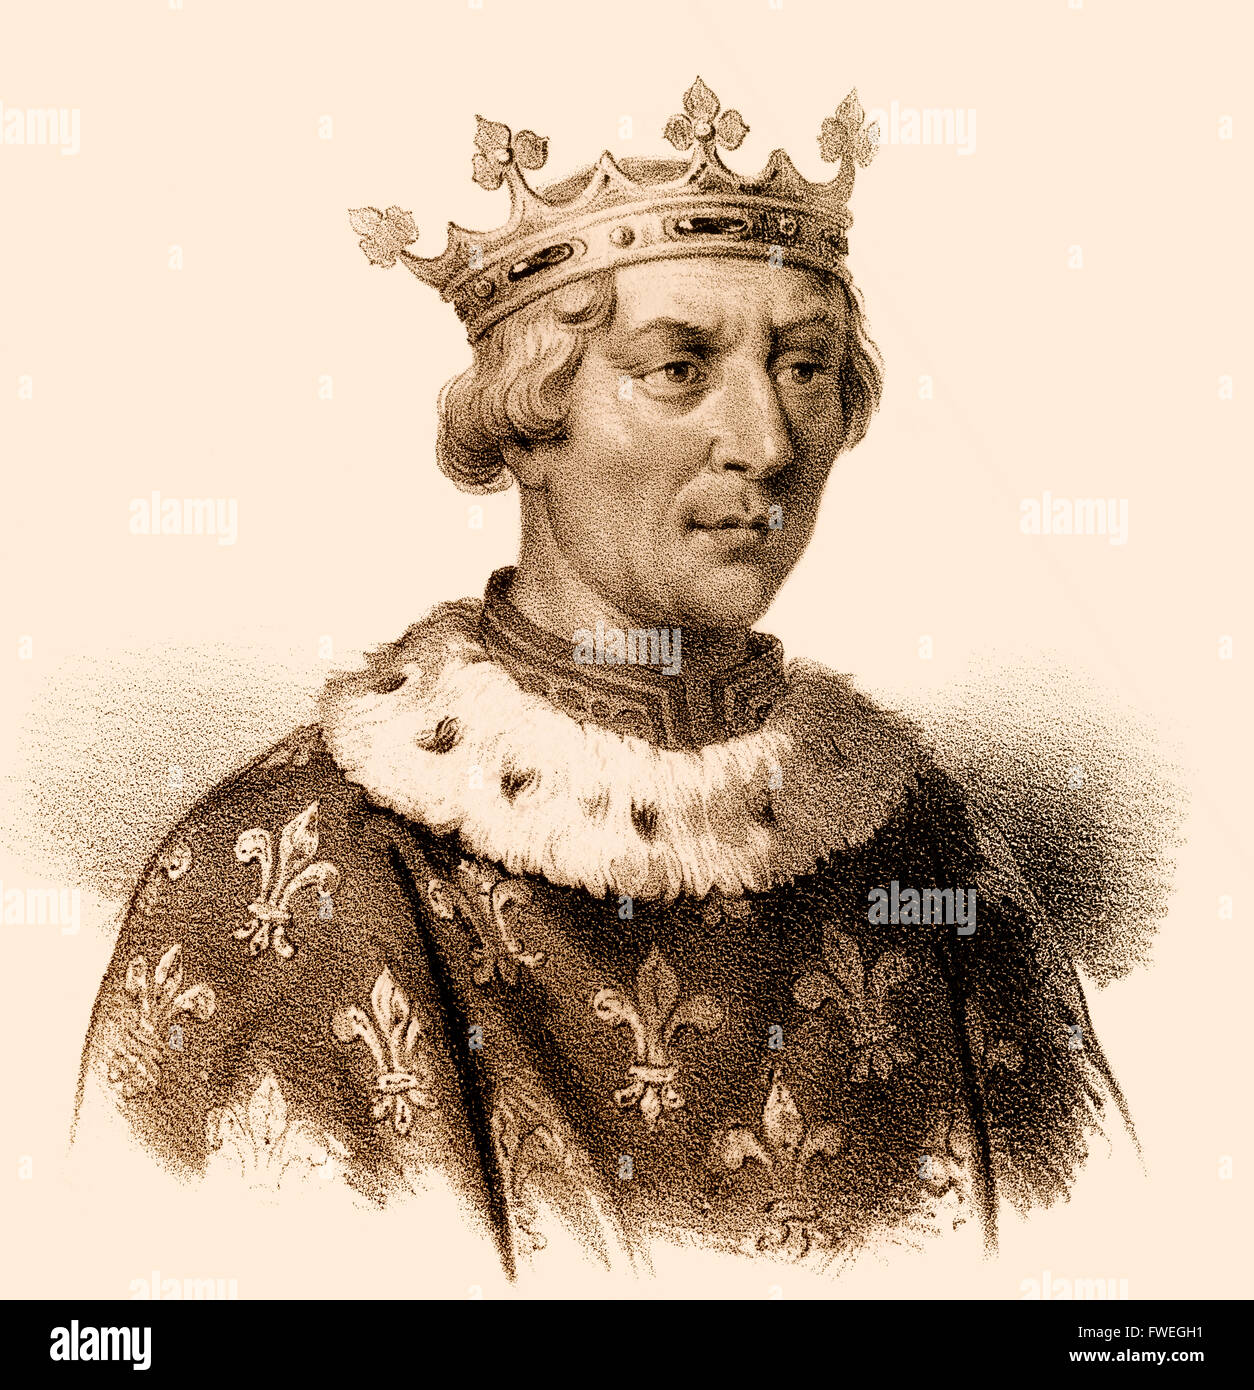 Louis VIII the Lion, Ludwig VIII., 1187-1226, King of France from the House of Capet, King of England Stock Photo